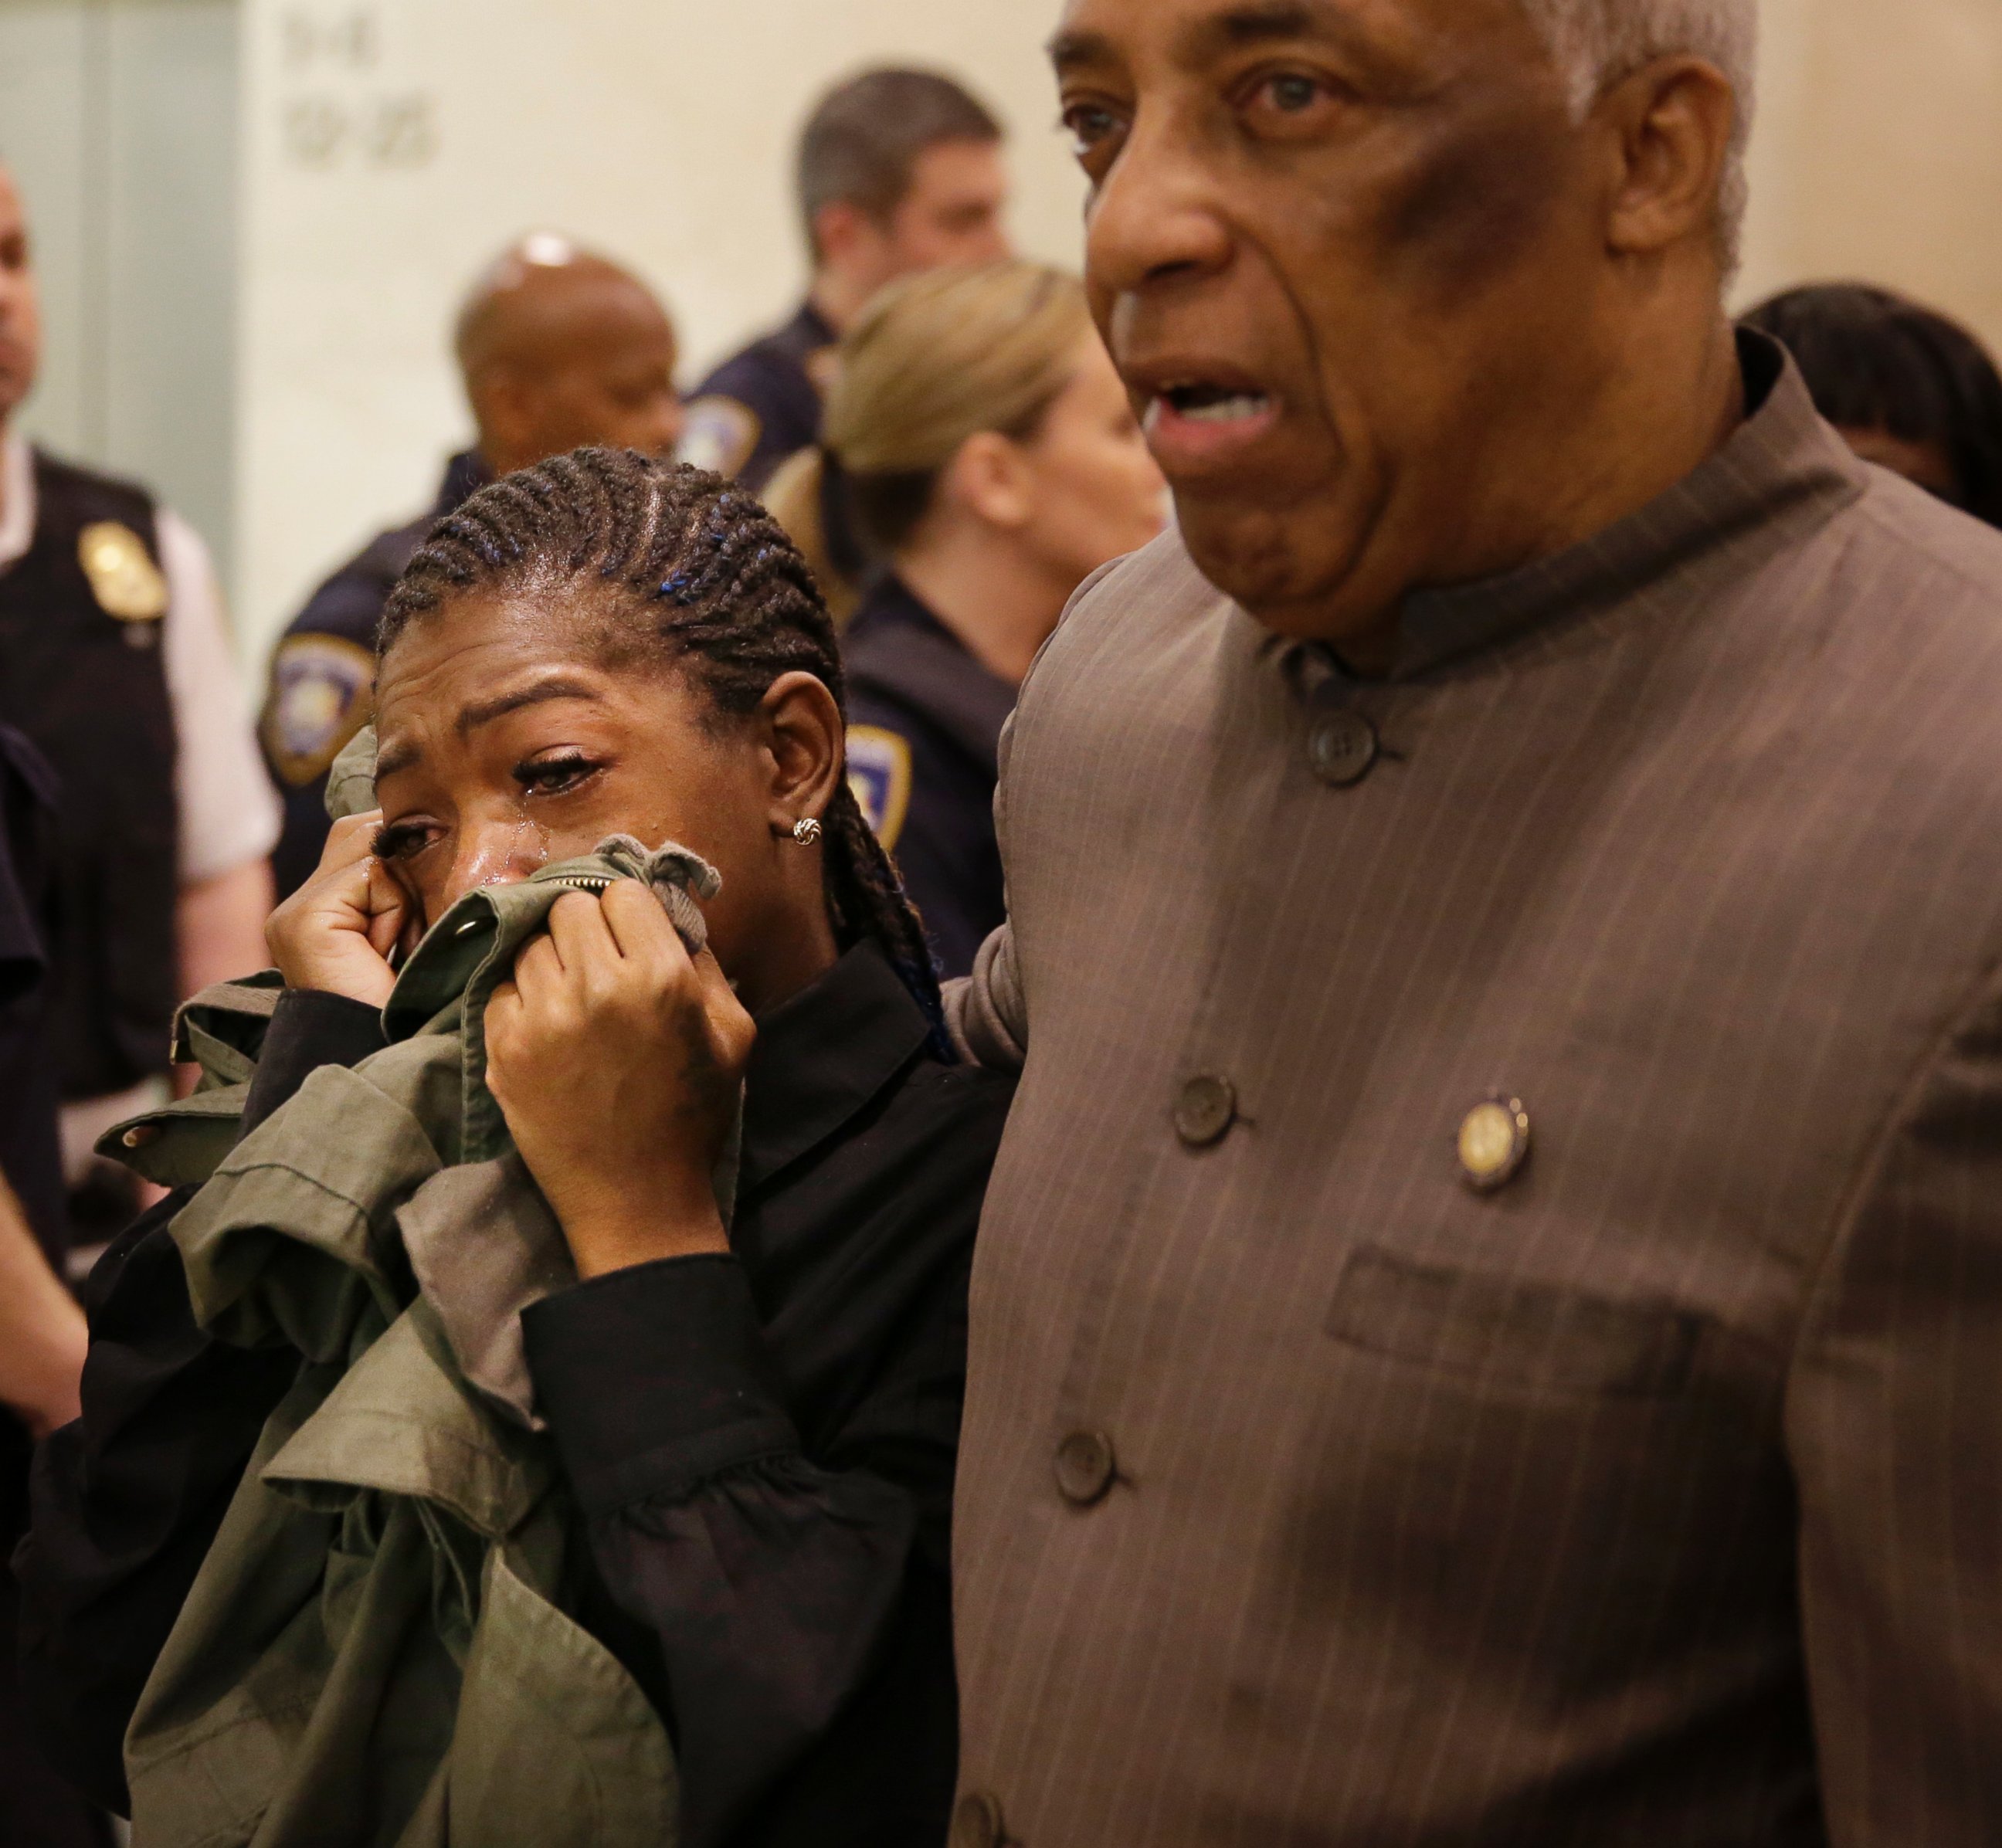 PHOTO: Melissa Butler, Akai Gurley's girlfriend, cries as she is escorted out of the courtroom by Assemblyman Charles Barron in New York, Tuesday, April 19, 2016.